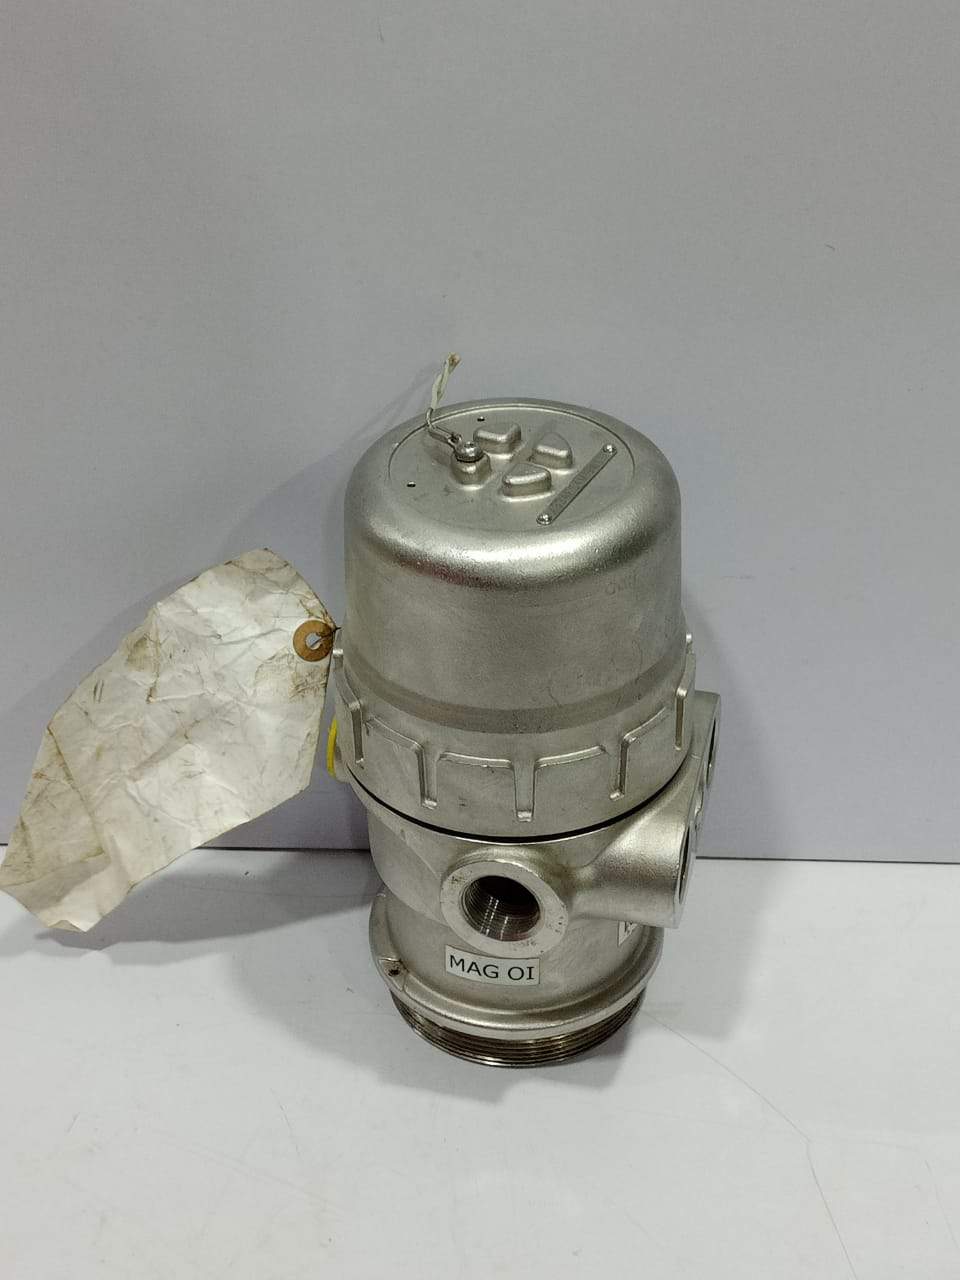 Autronica X33AFS4M19W1 Flame Detector Autro Flame 008182-101